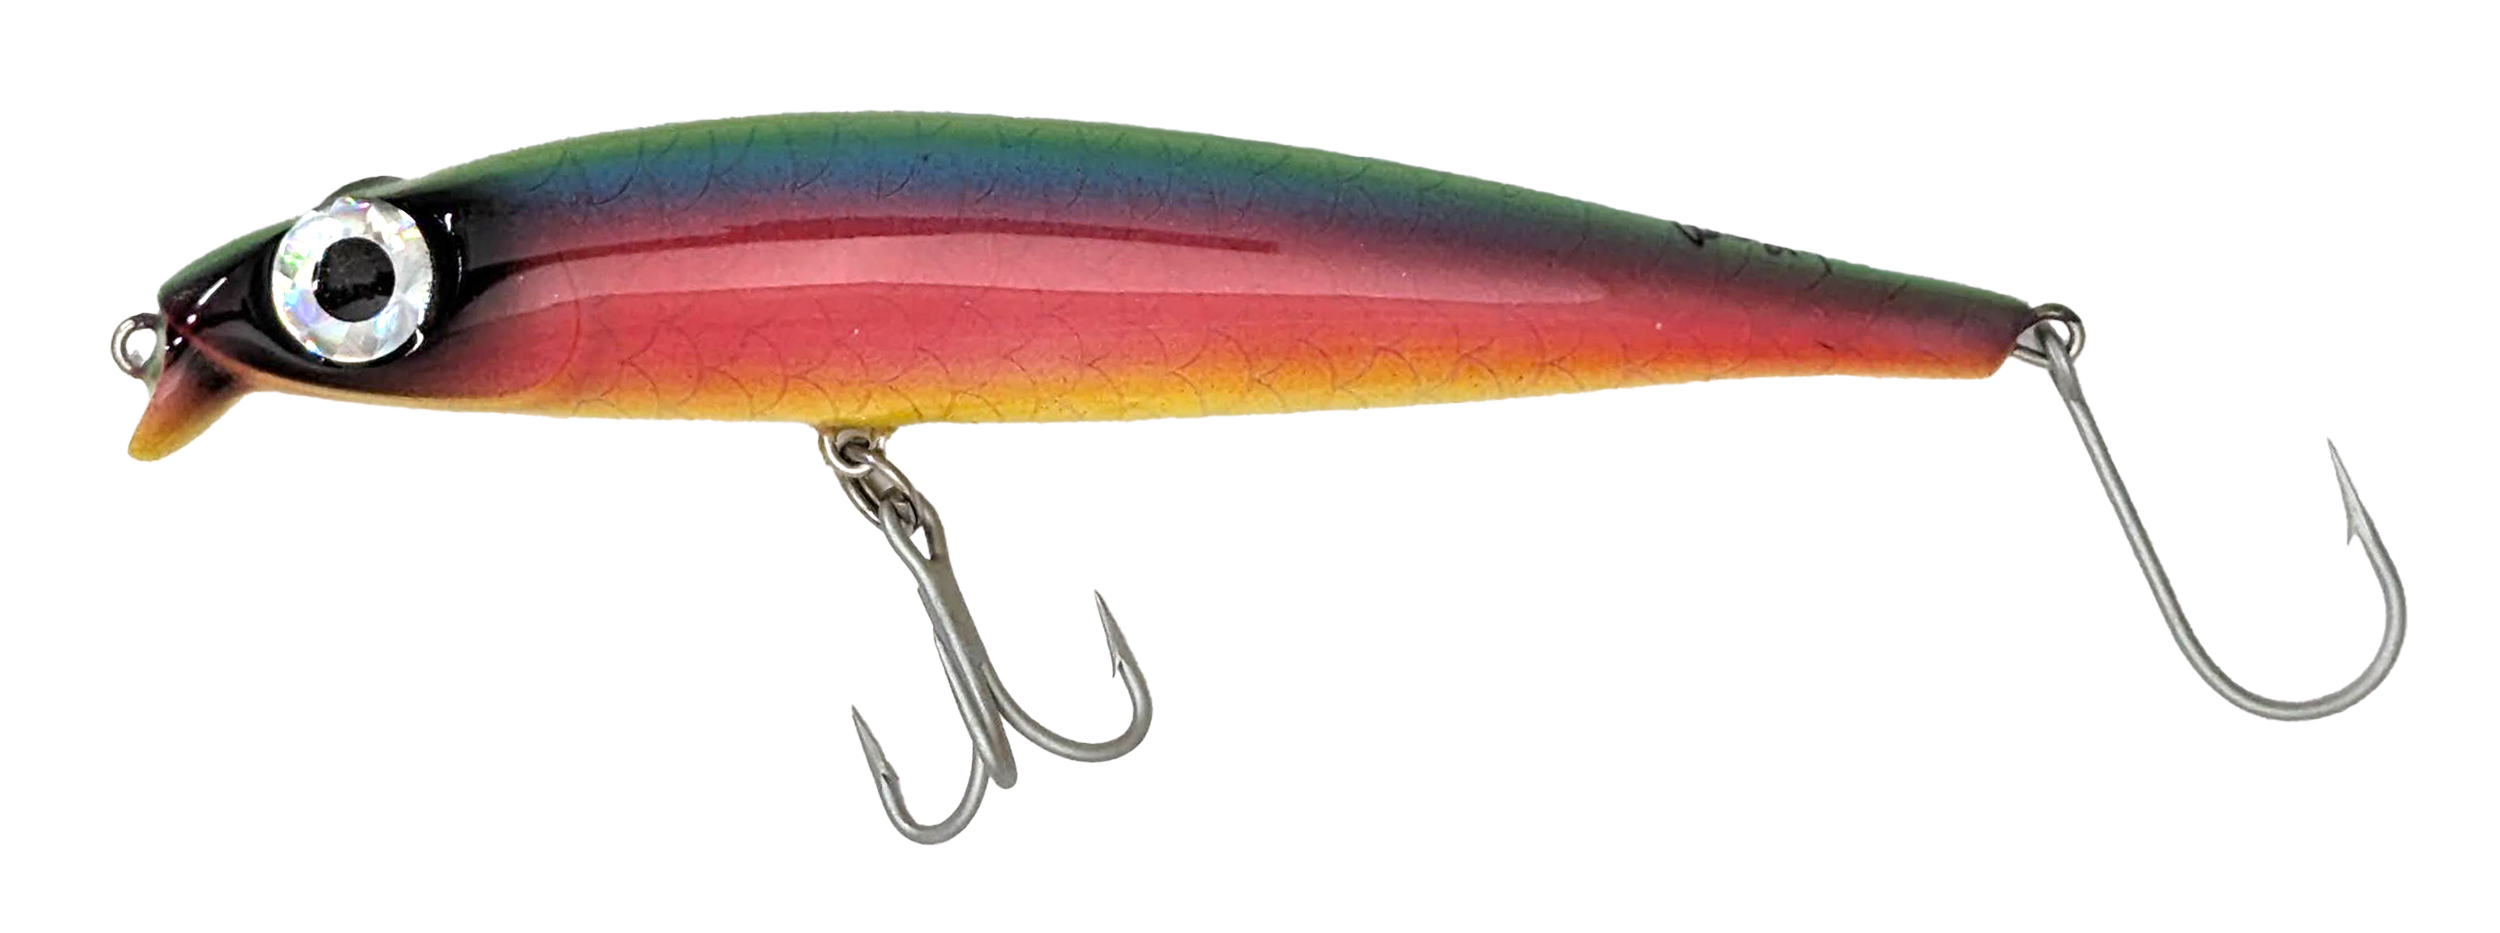 New Surfcasting Gear — The Surfcaster - Trusted Fishing Supplies For Over  40 Years